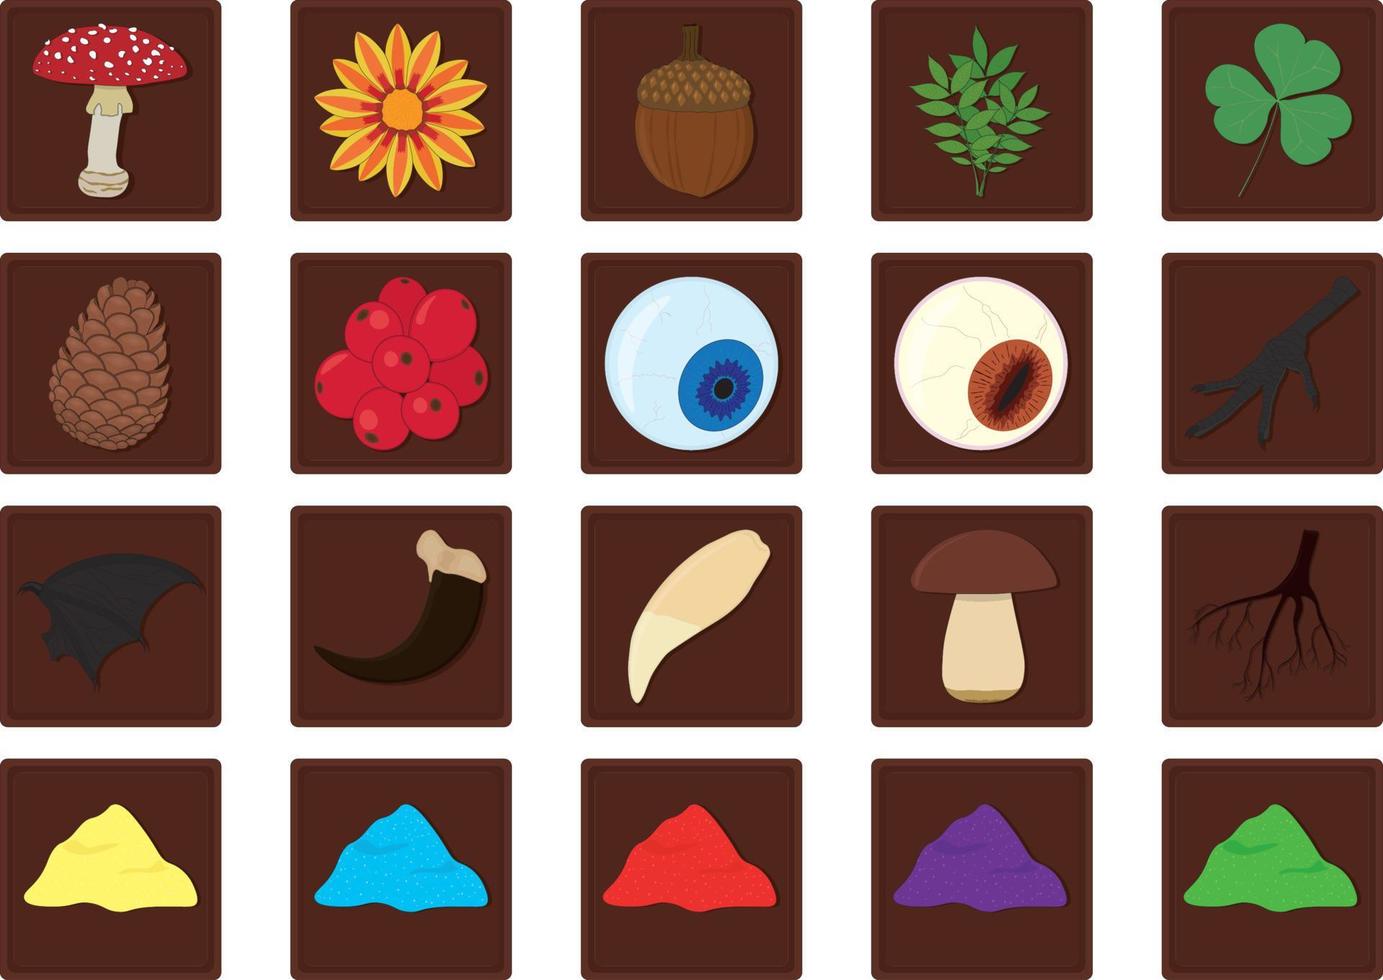 Alchemy ingredients collection game assets vector illustration